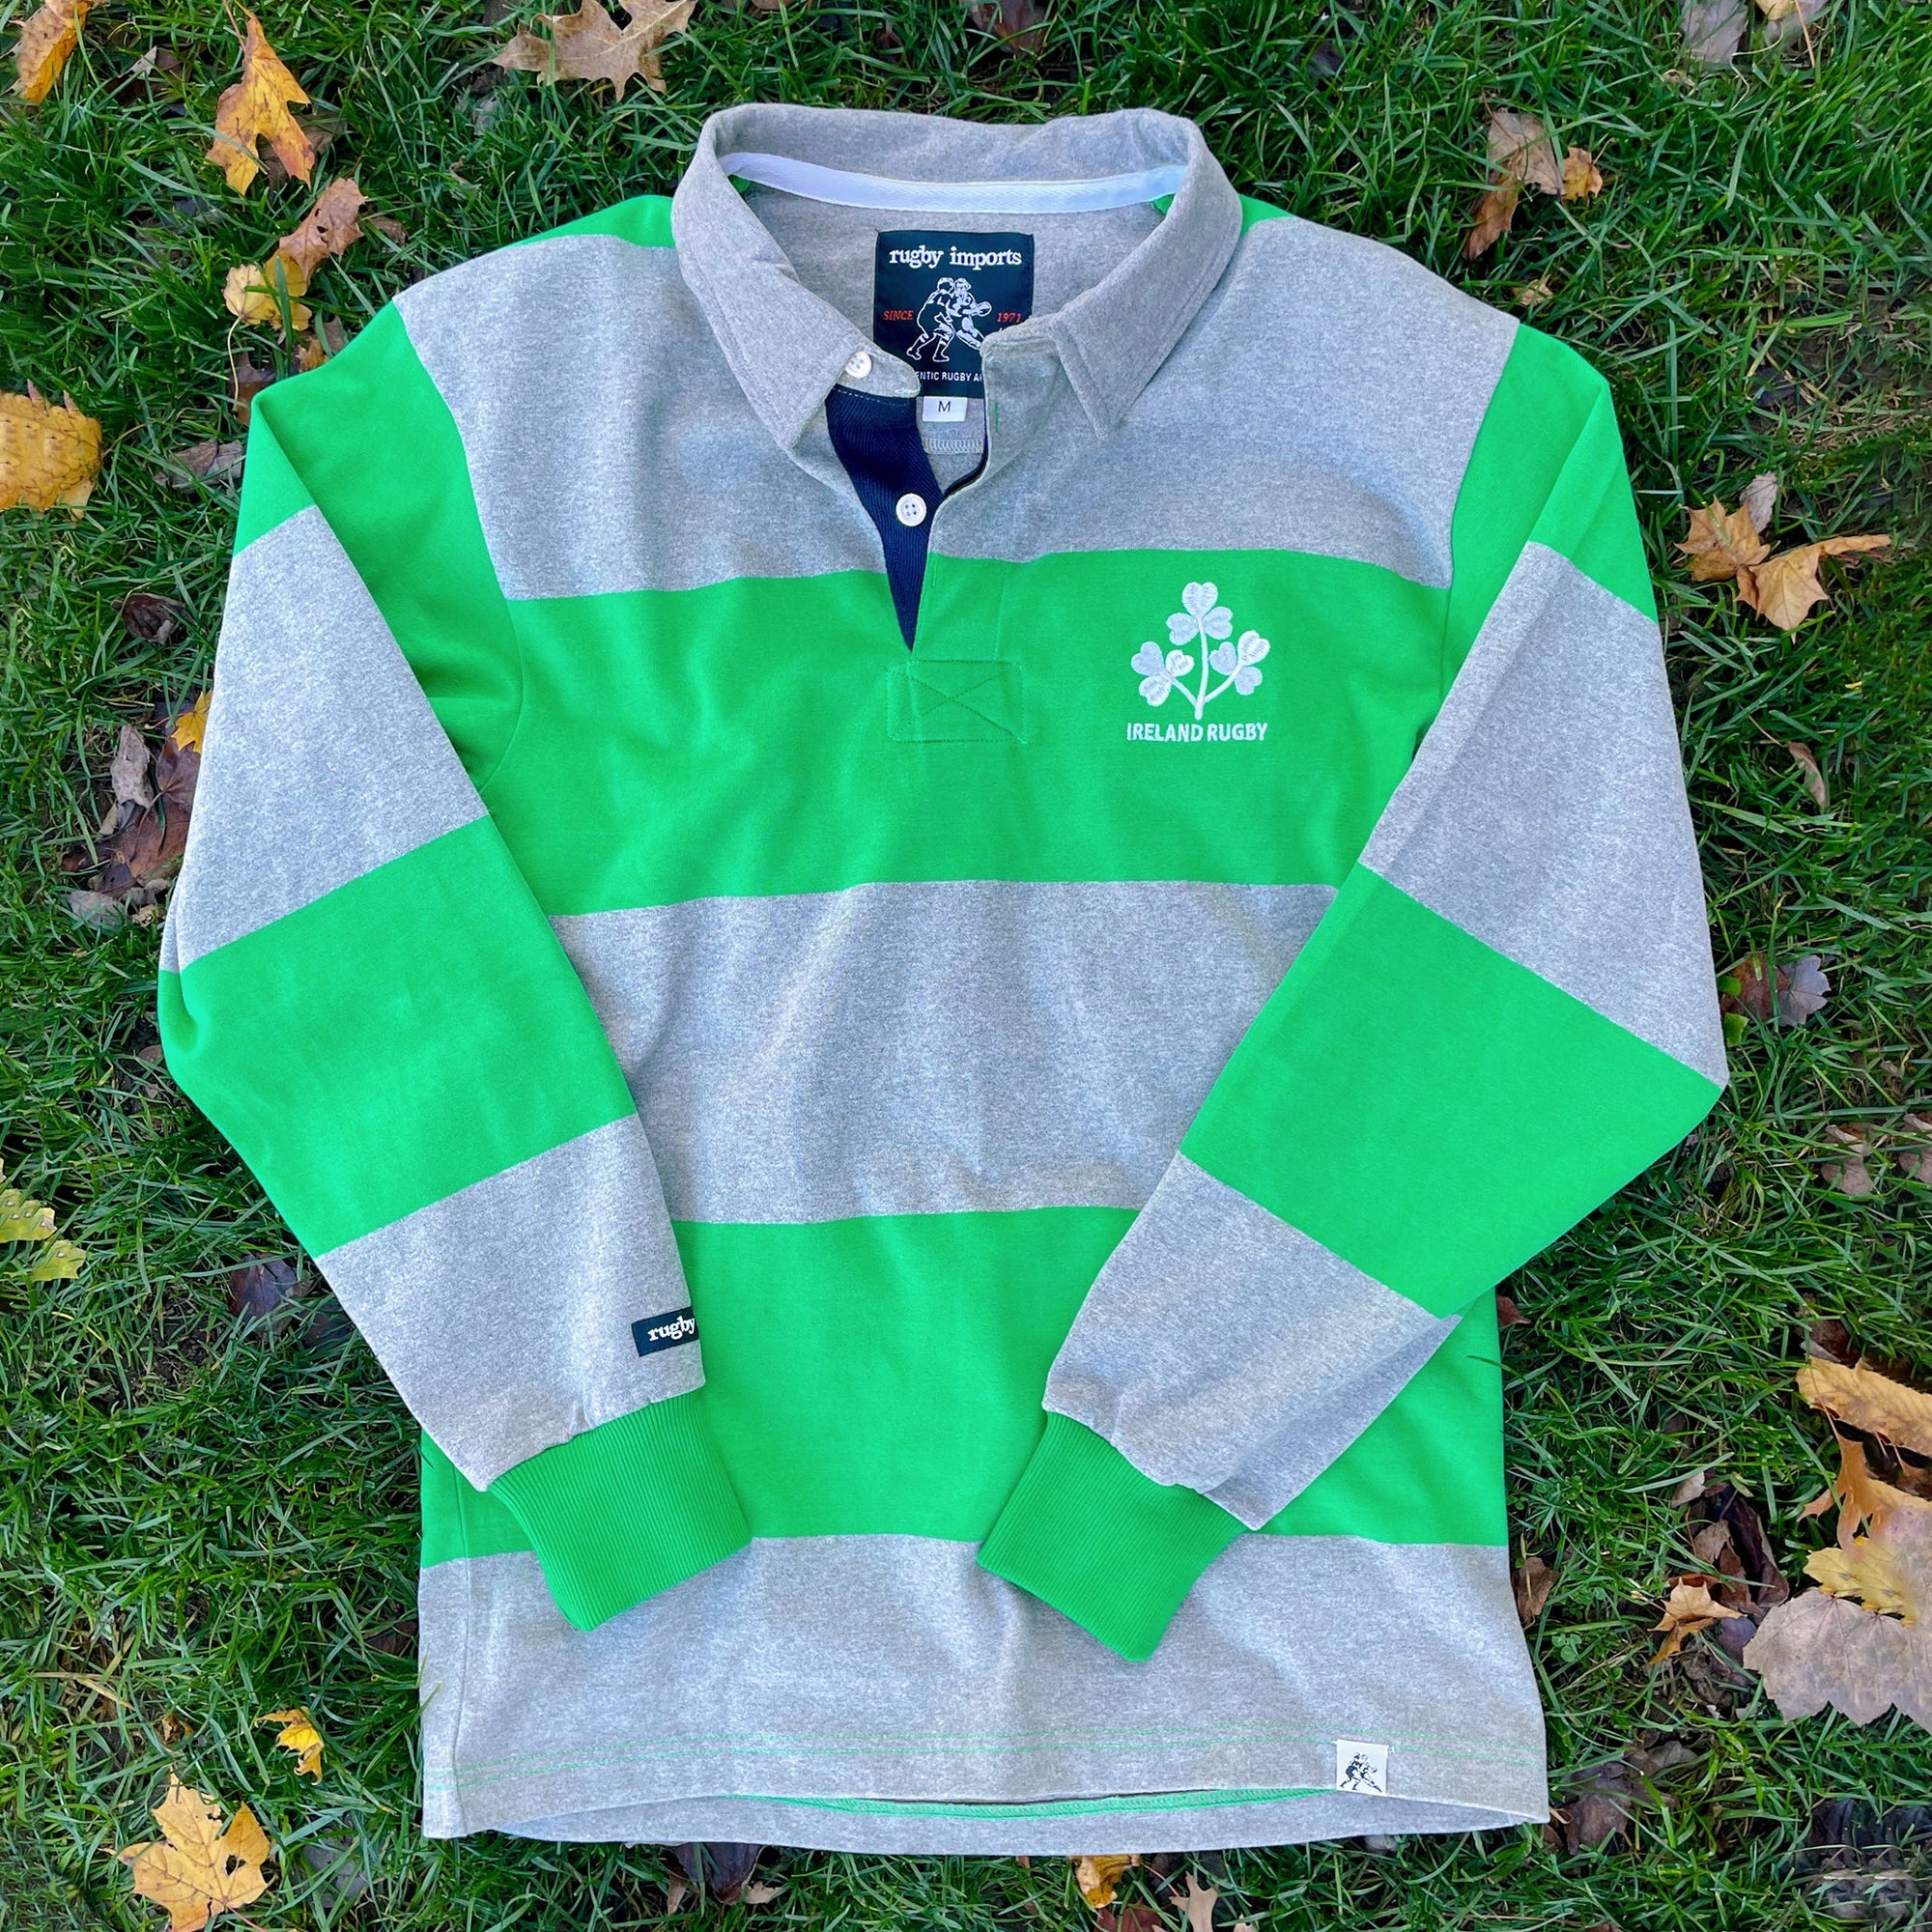 Imports - Authentic Rugby gear, Apparel & Teamwear